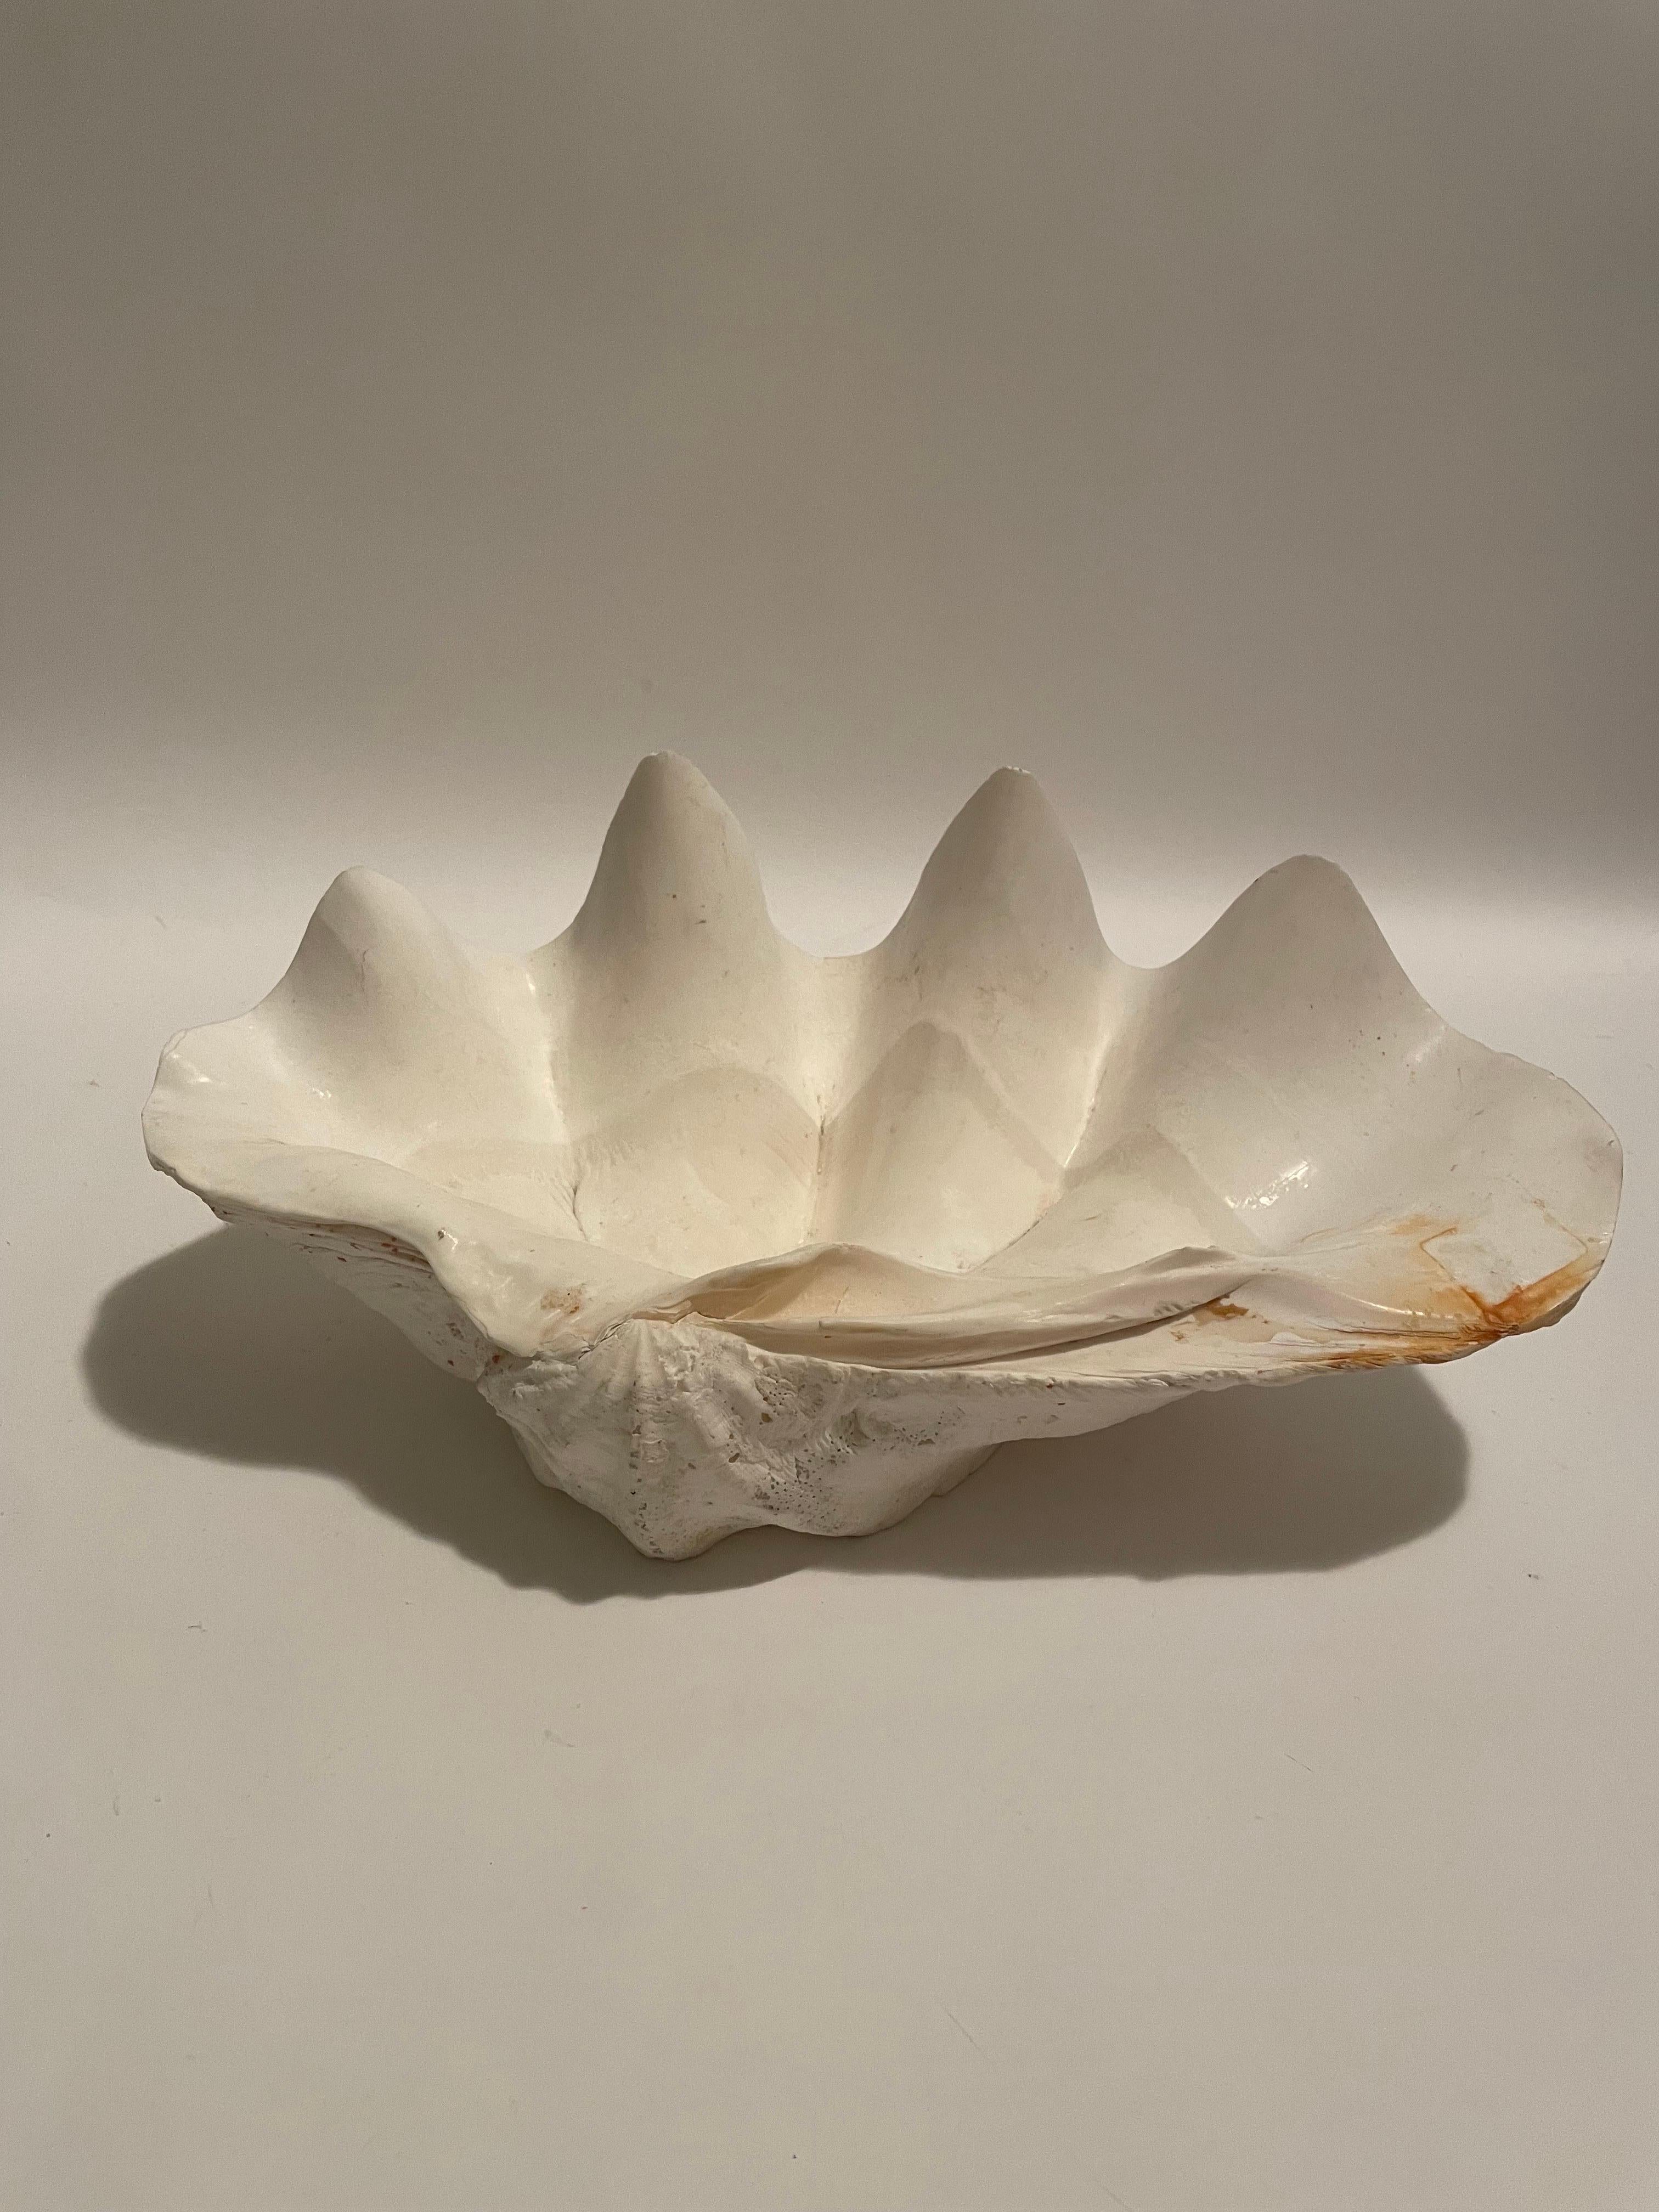 This is a beautiful white clam shell in wonderful condition